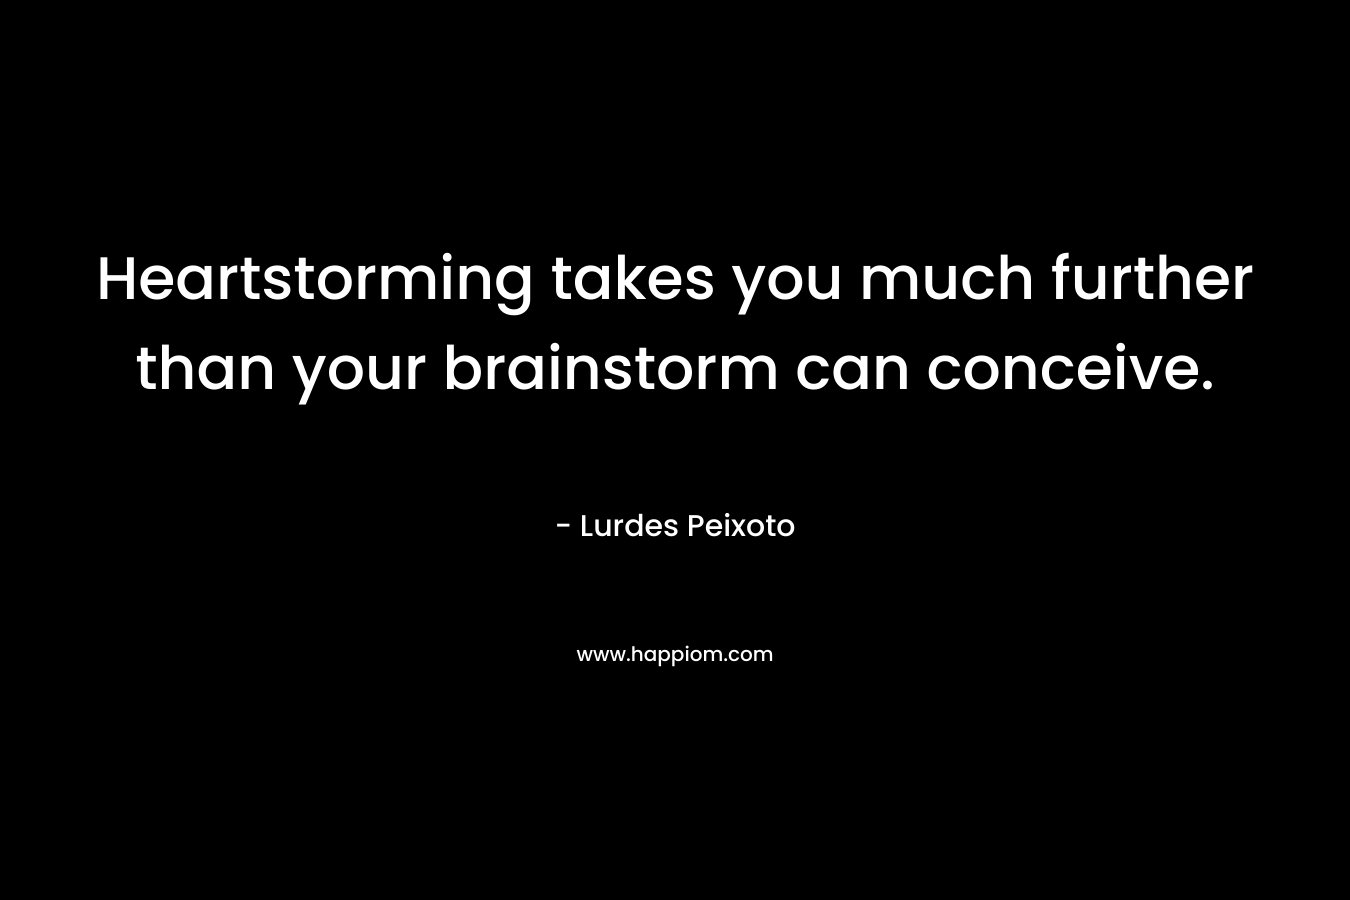 Heartstorming takes you much further than your brainstorm can conceive. – Lurdes Peixoto